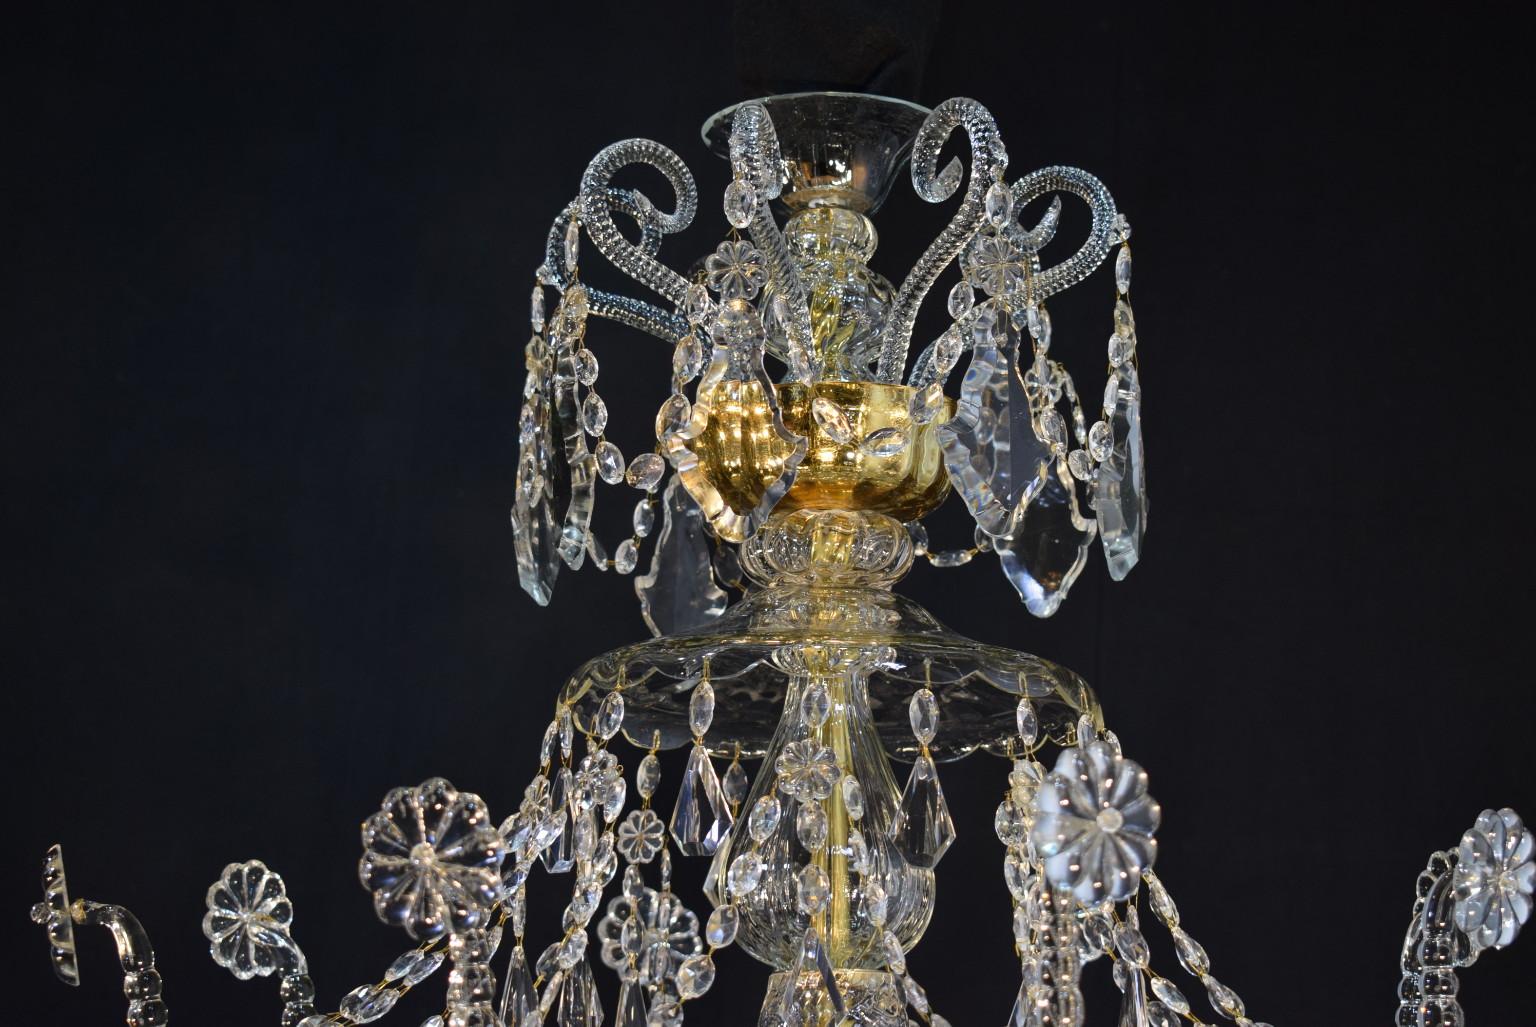 Superb 19th century eight-light Venetian chandelier, originally for candles now electrified.
CW4541
 